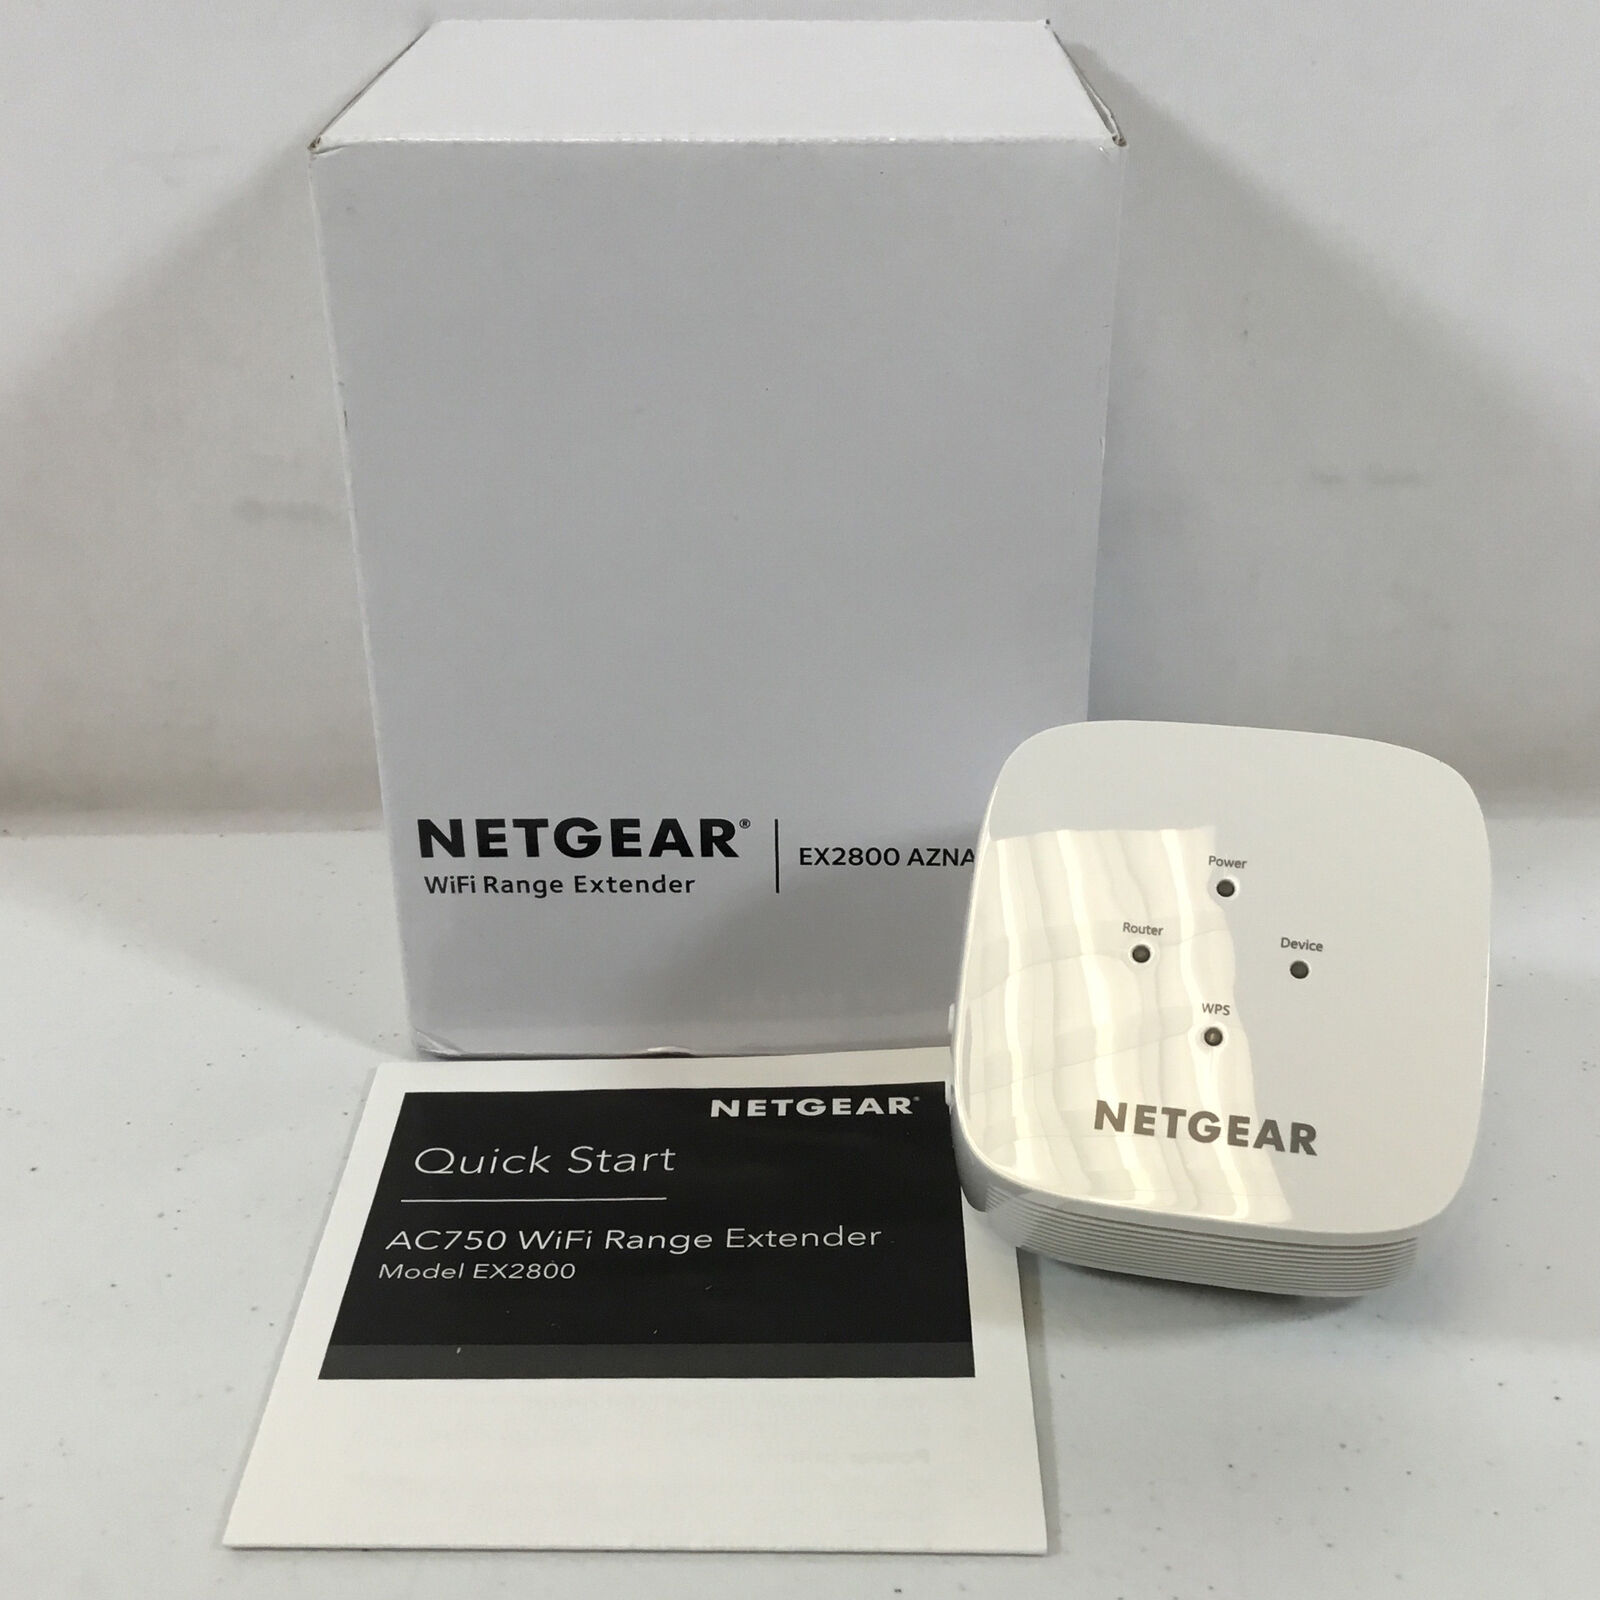 Netgear EX2800 White AC750 Wi Fi Range Extender And Signal Booster Used